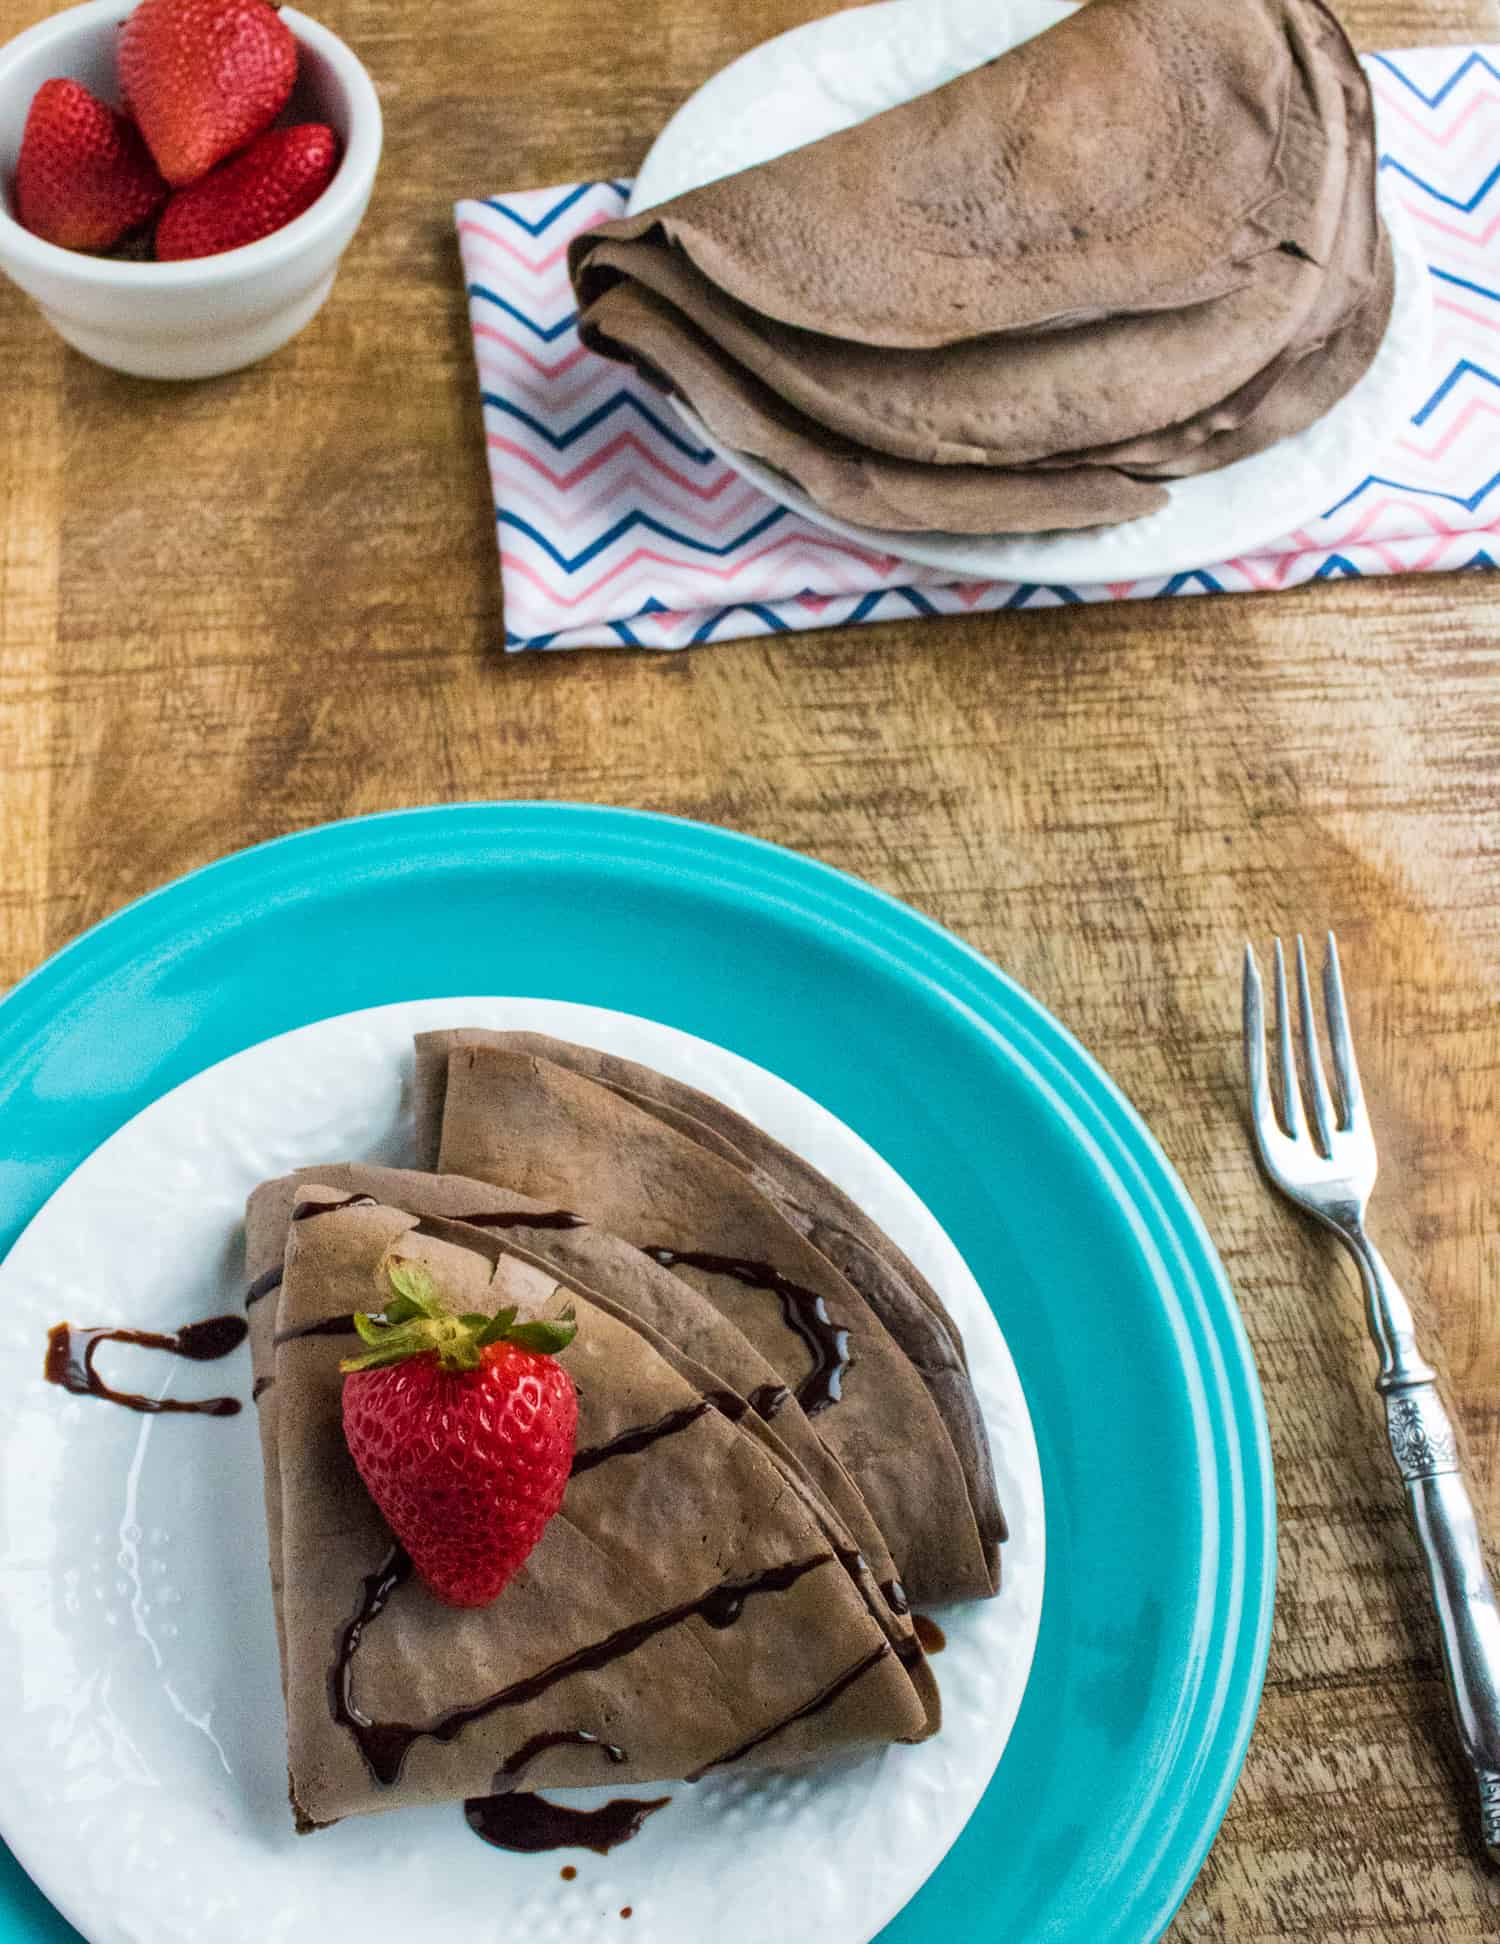 chocolate dessert crepes topped with a strawberry and chocolate sauce, served on a white plate placed on top of a blue plate sitting next to a fork, bowl of strawberries, and a plate of extra crepes